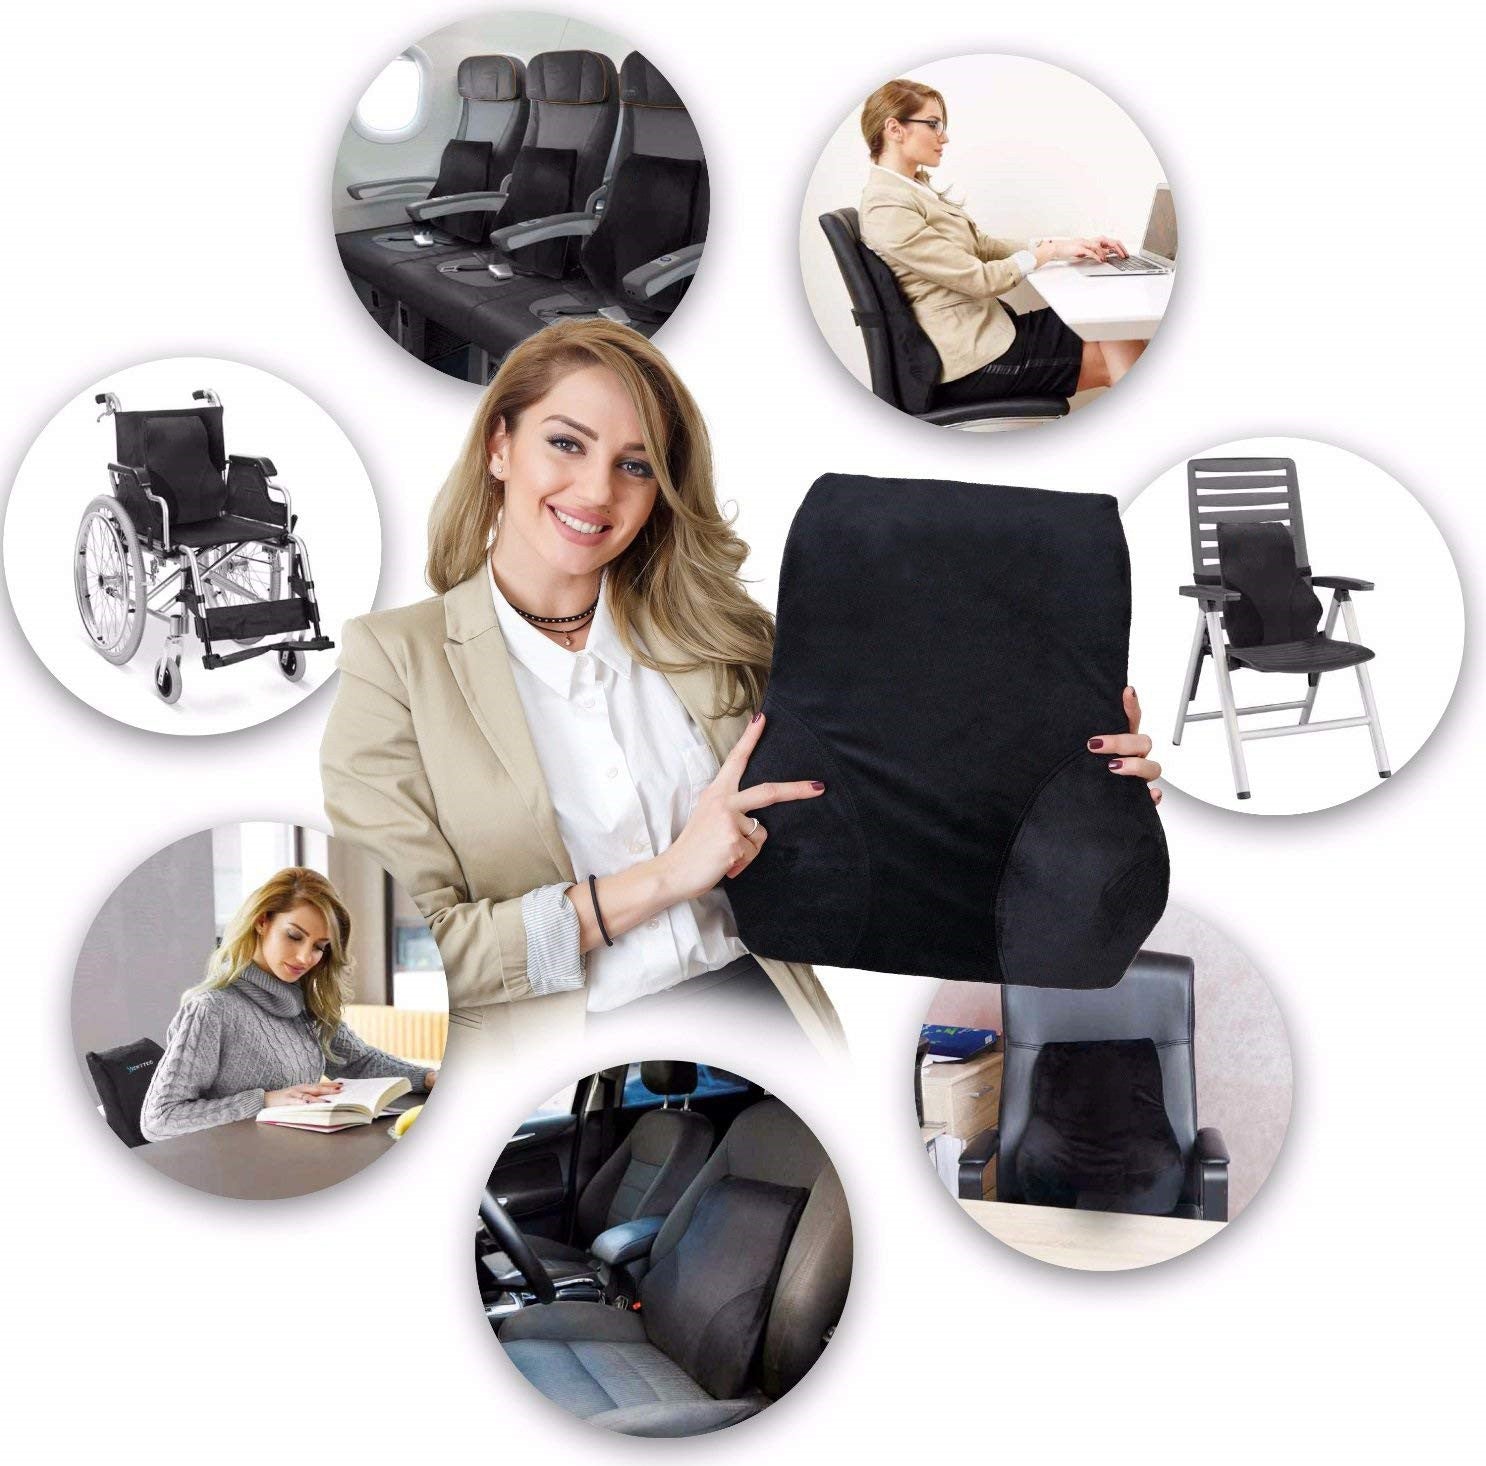 Full Lumbar Support Premium Entire High Back Pillow For Office